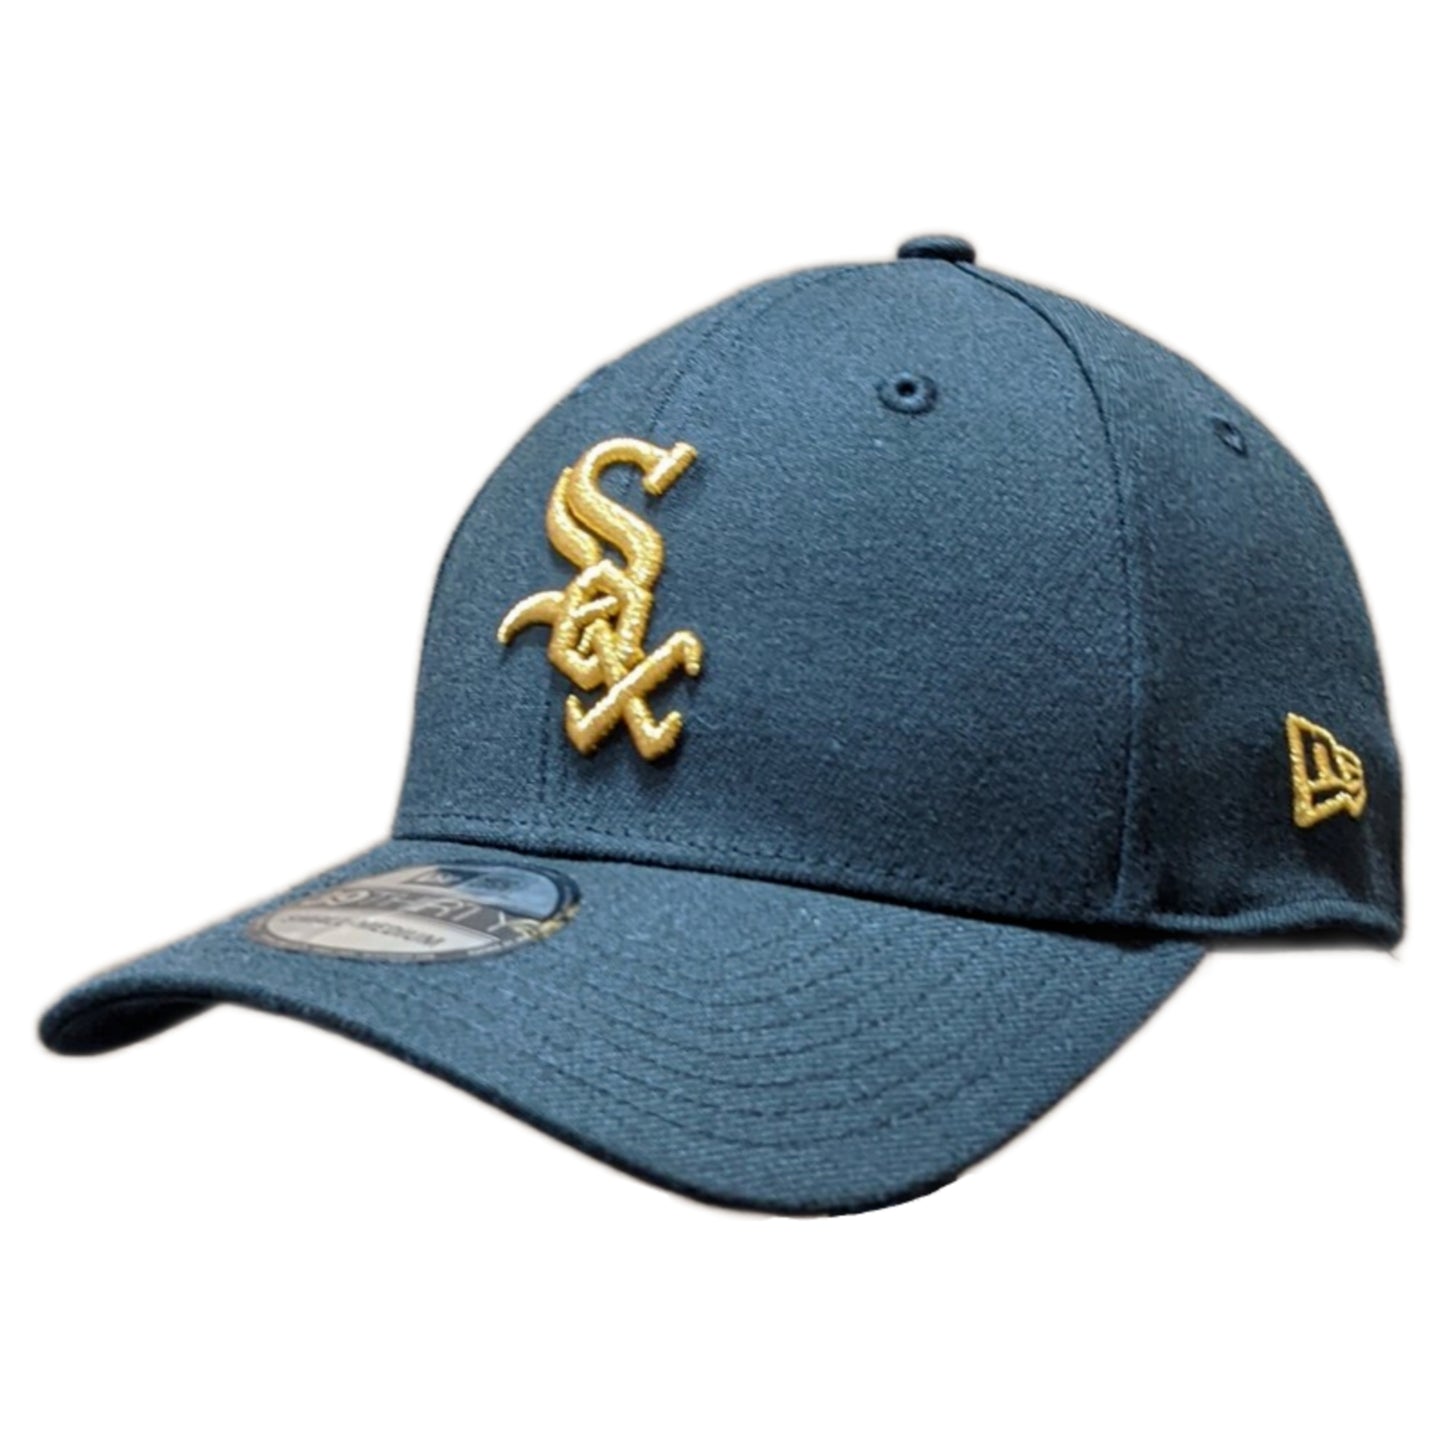 Chicago White Sox 2005 World Series Champions Cooperstown Collection Gold Rush 39THIRTY Flex Fit New Era Hat